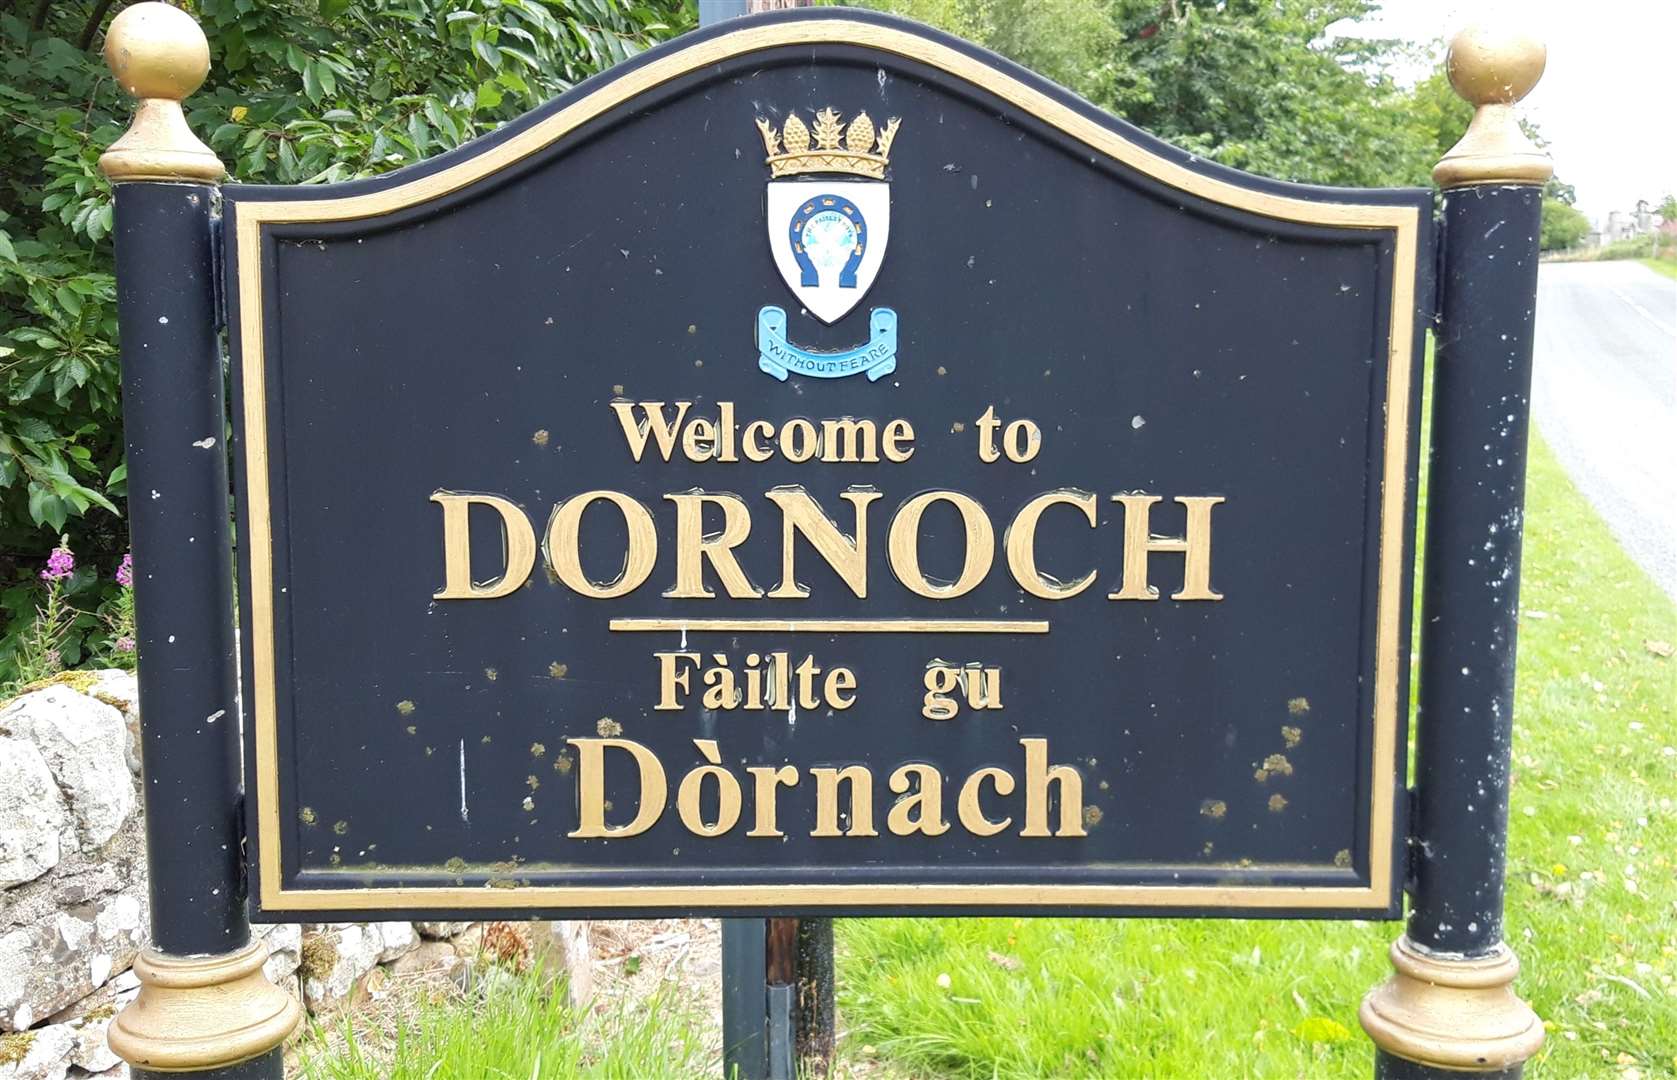 Dornoch has a large commons area.